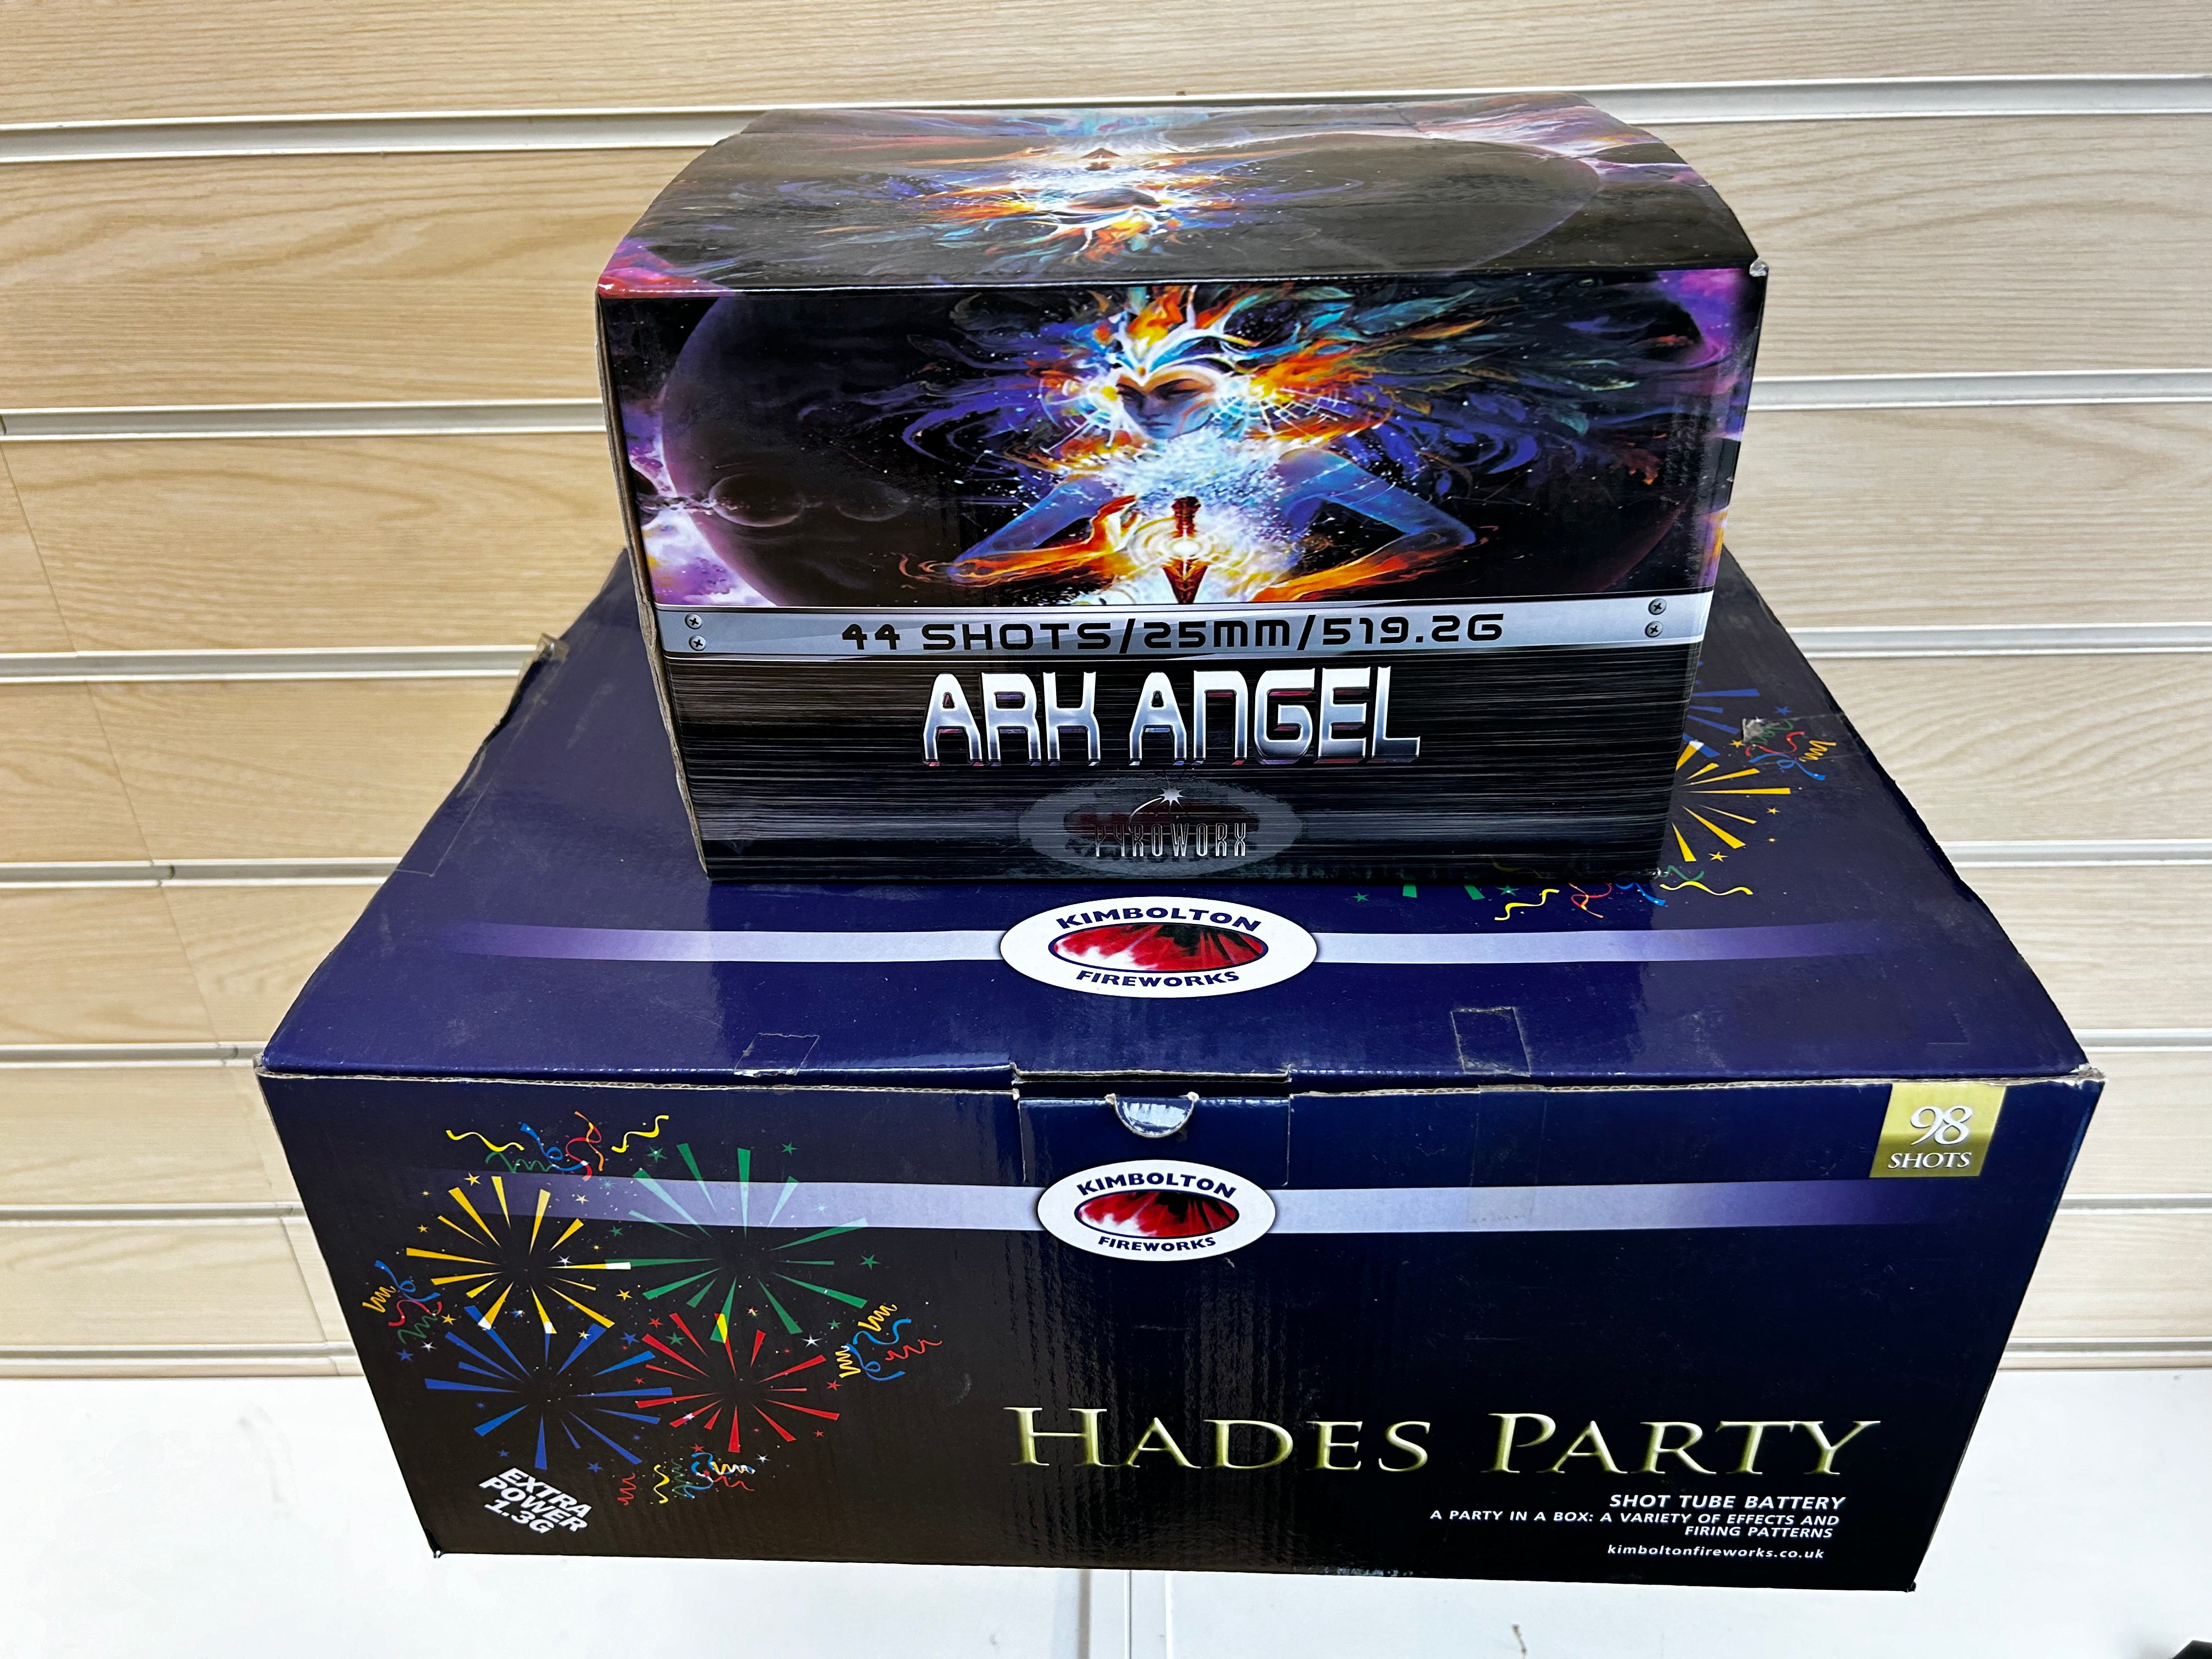 HADES PARTY , FREE !! £69.99 ARK ANGEL FIREWORK WITH THIS WOW , LIMITED STOCK!!